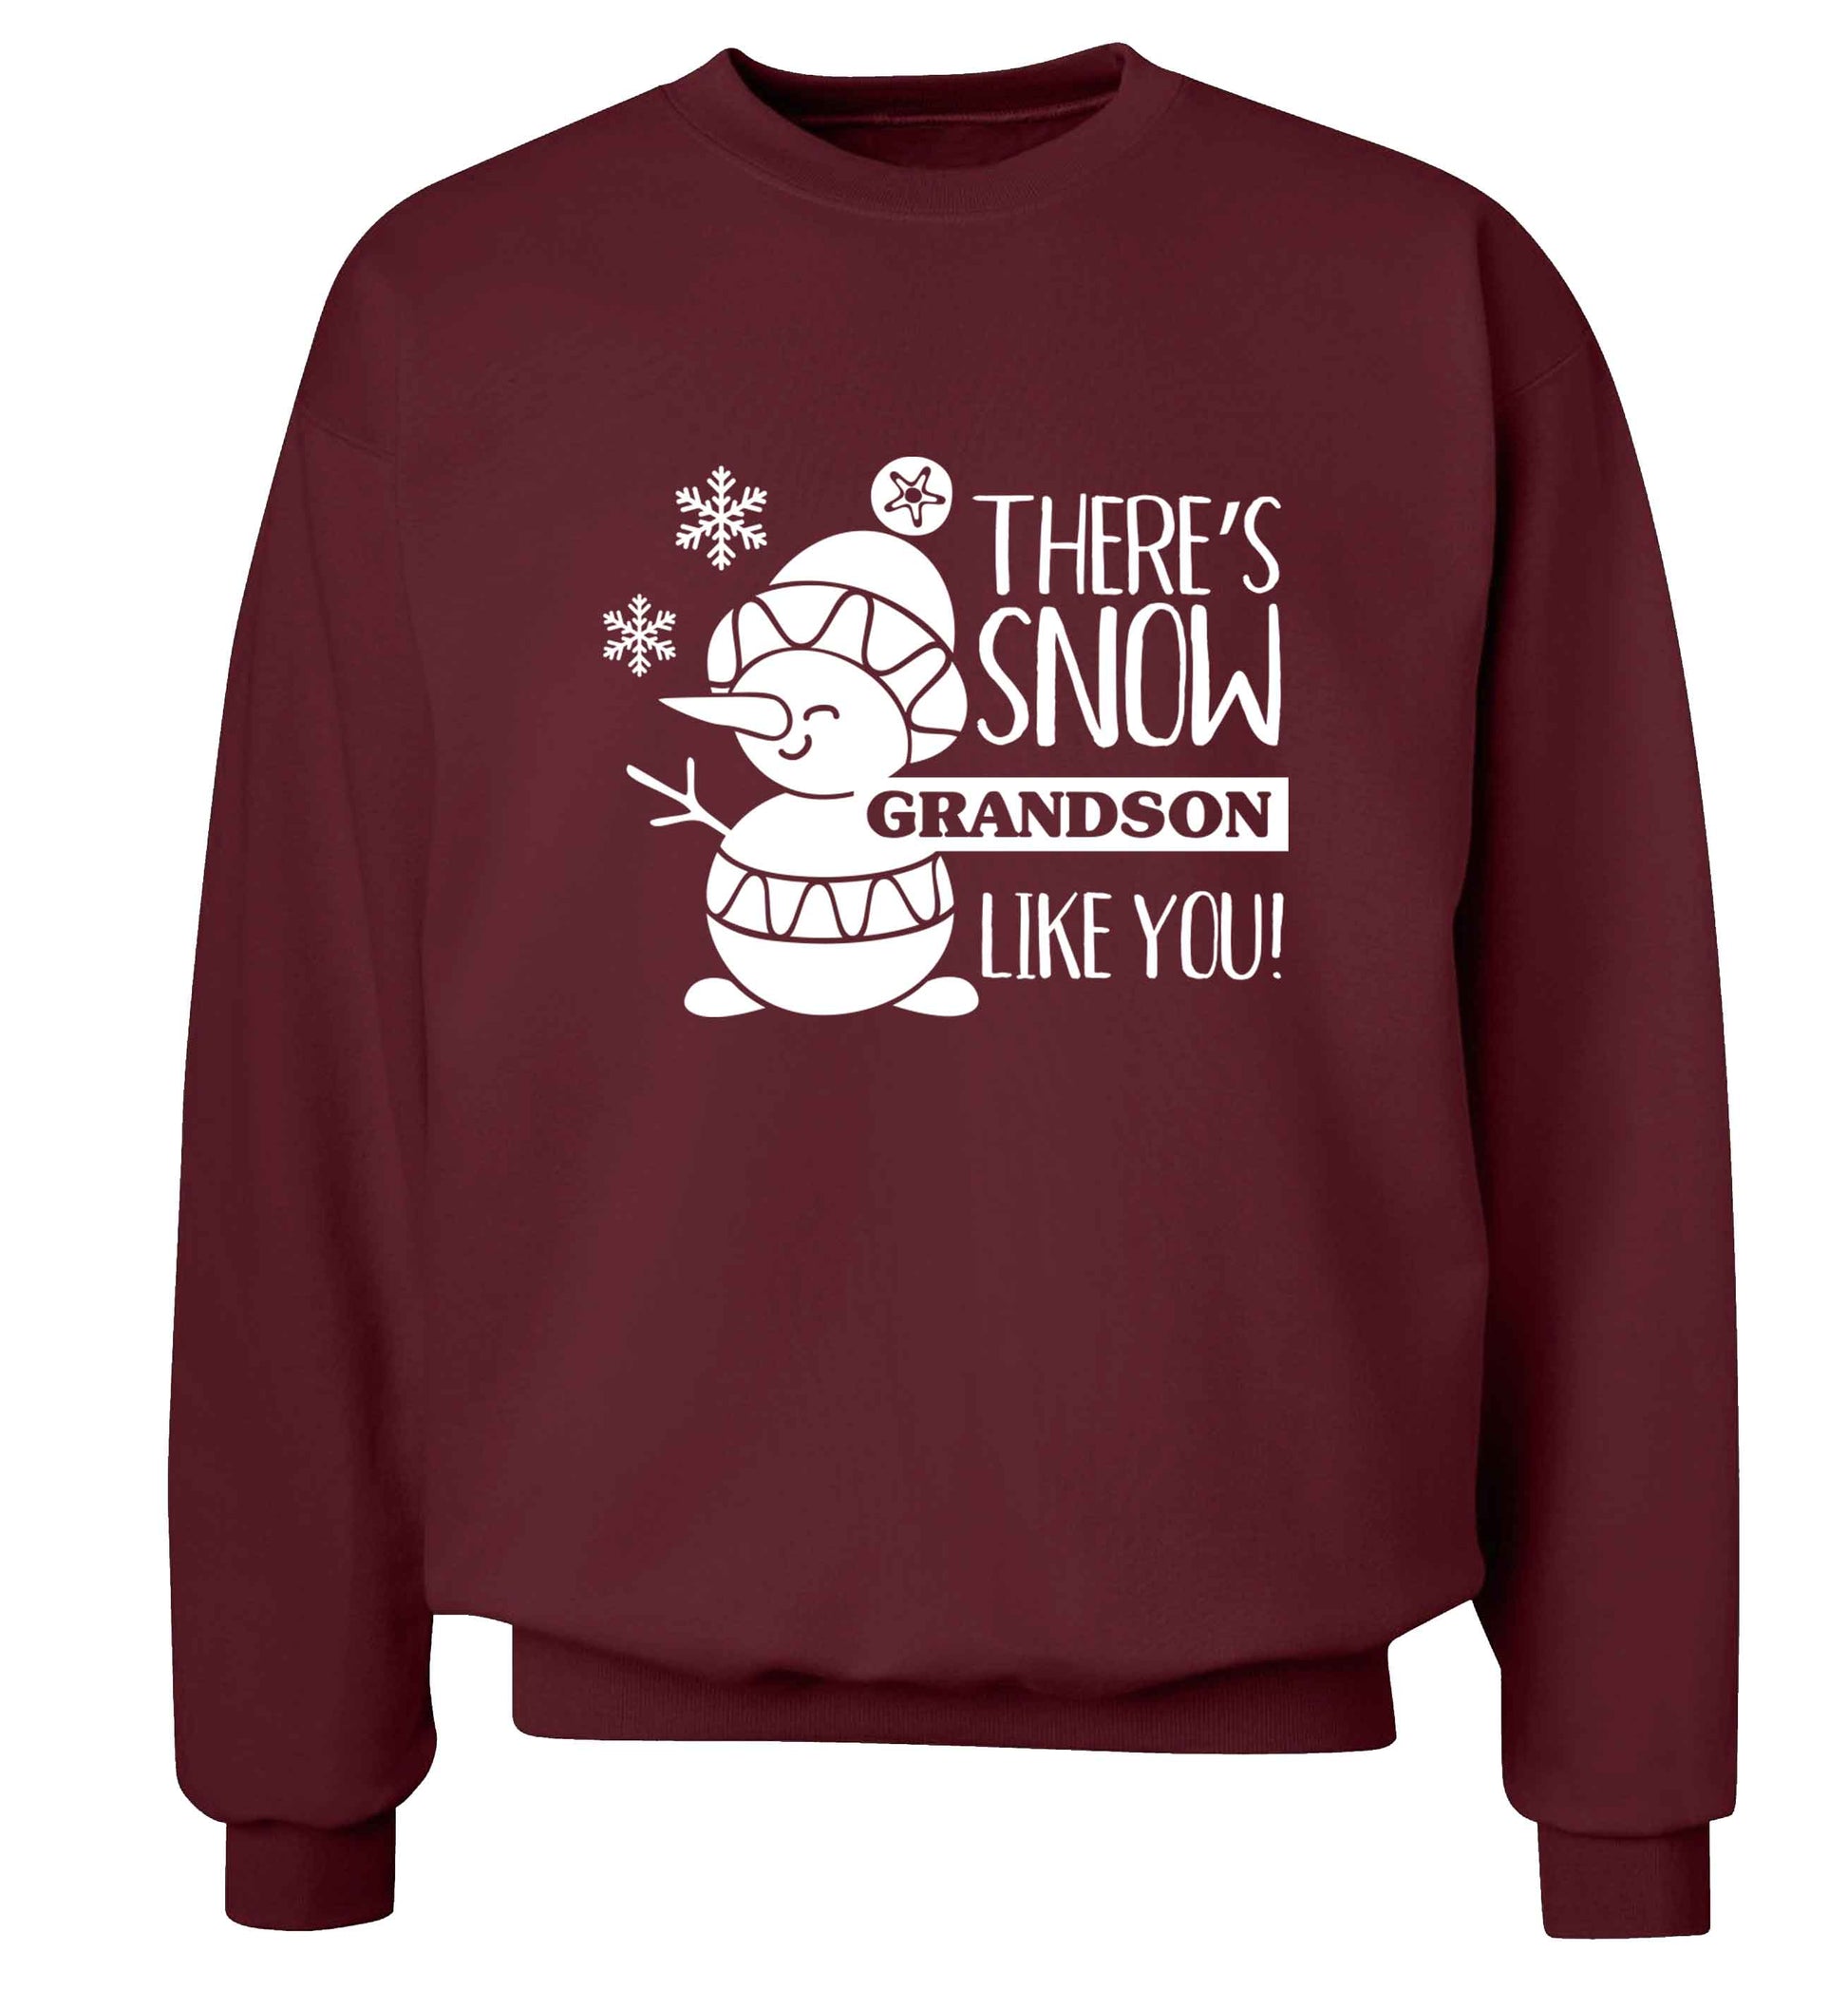 There's snow grandson like you adult's unisex maroon sweater 2XL